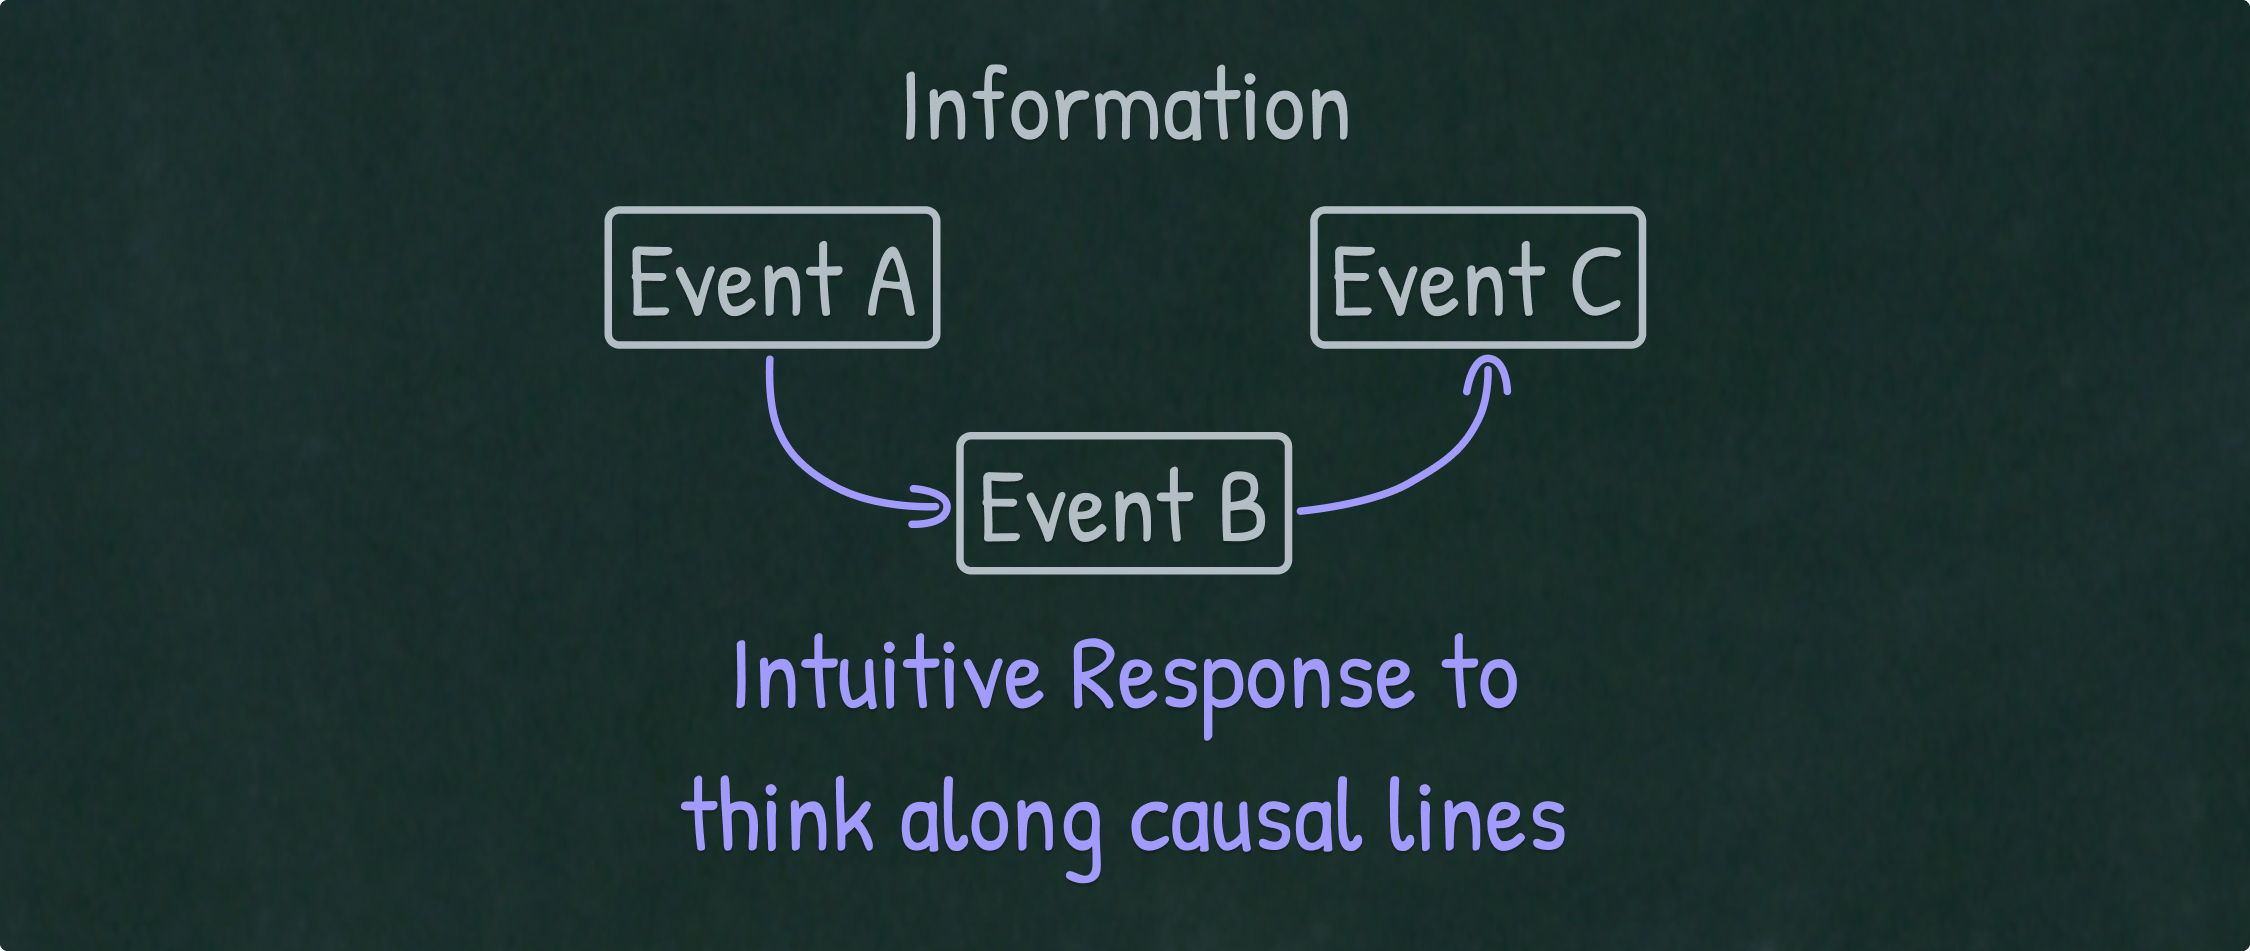 Illustration of our intuitive response to think along causal lines on raw information.